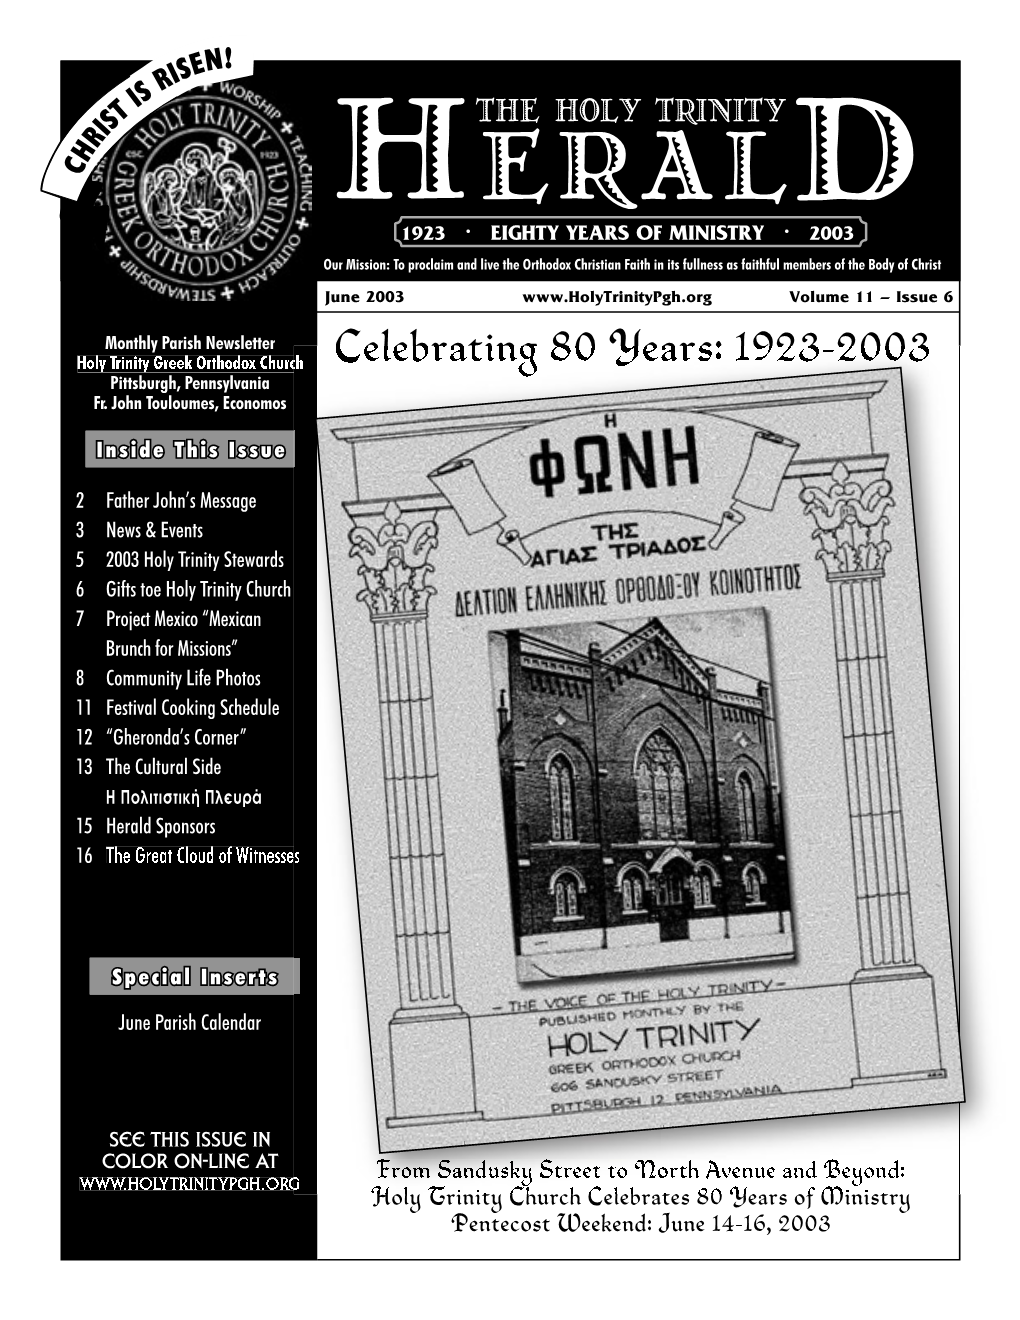 Herald Sponsors 16 the Great Cloud of Witnesses